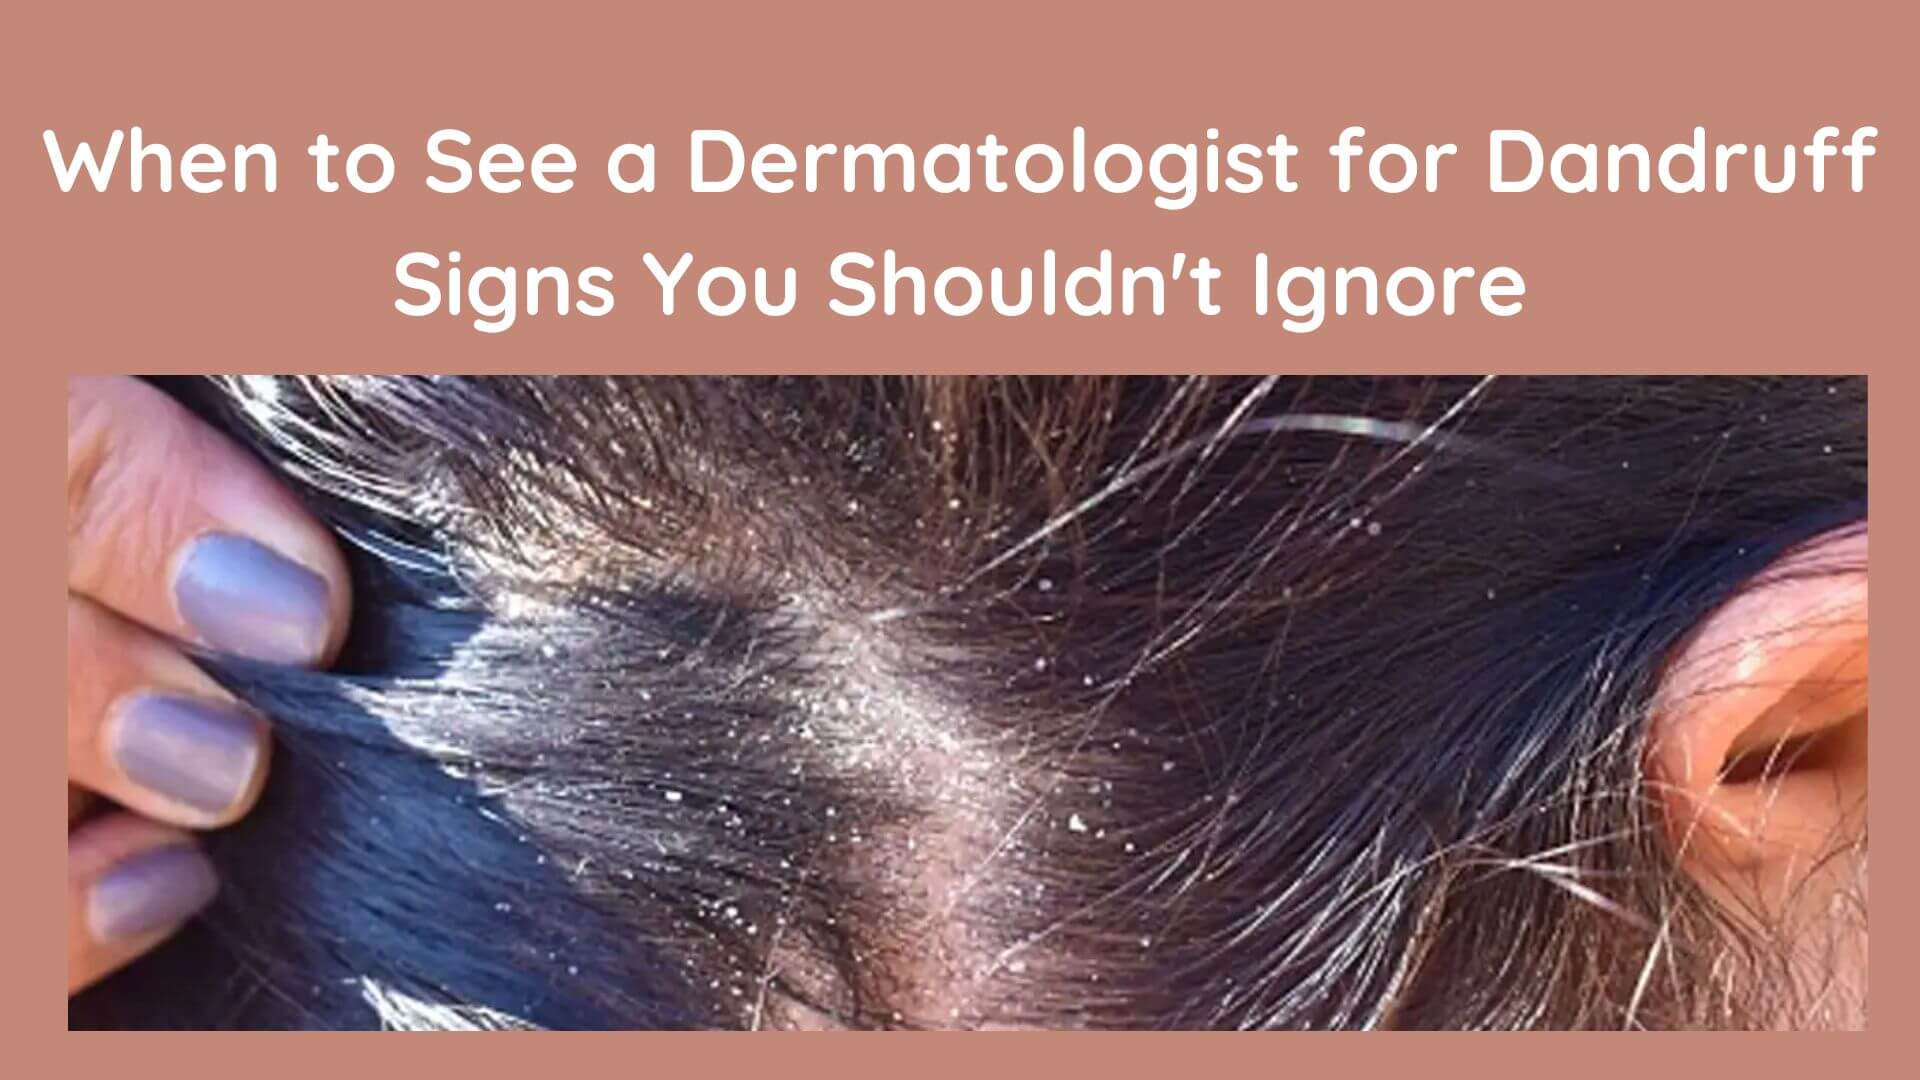 When to See a Dermatologist for Dandruff: Signs You Shouldn't Ignore